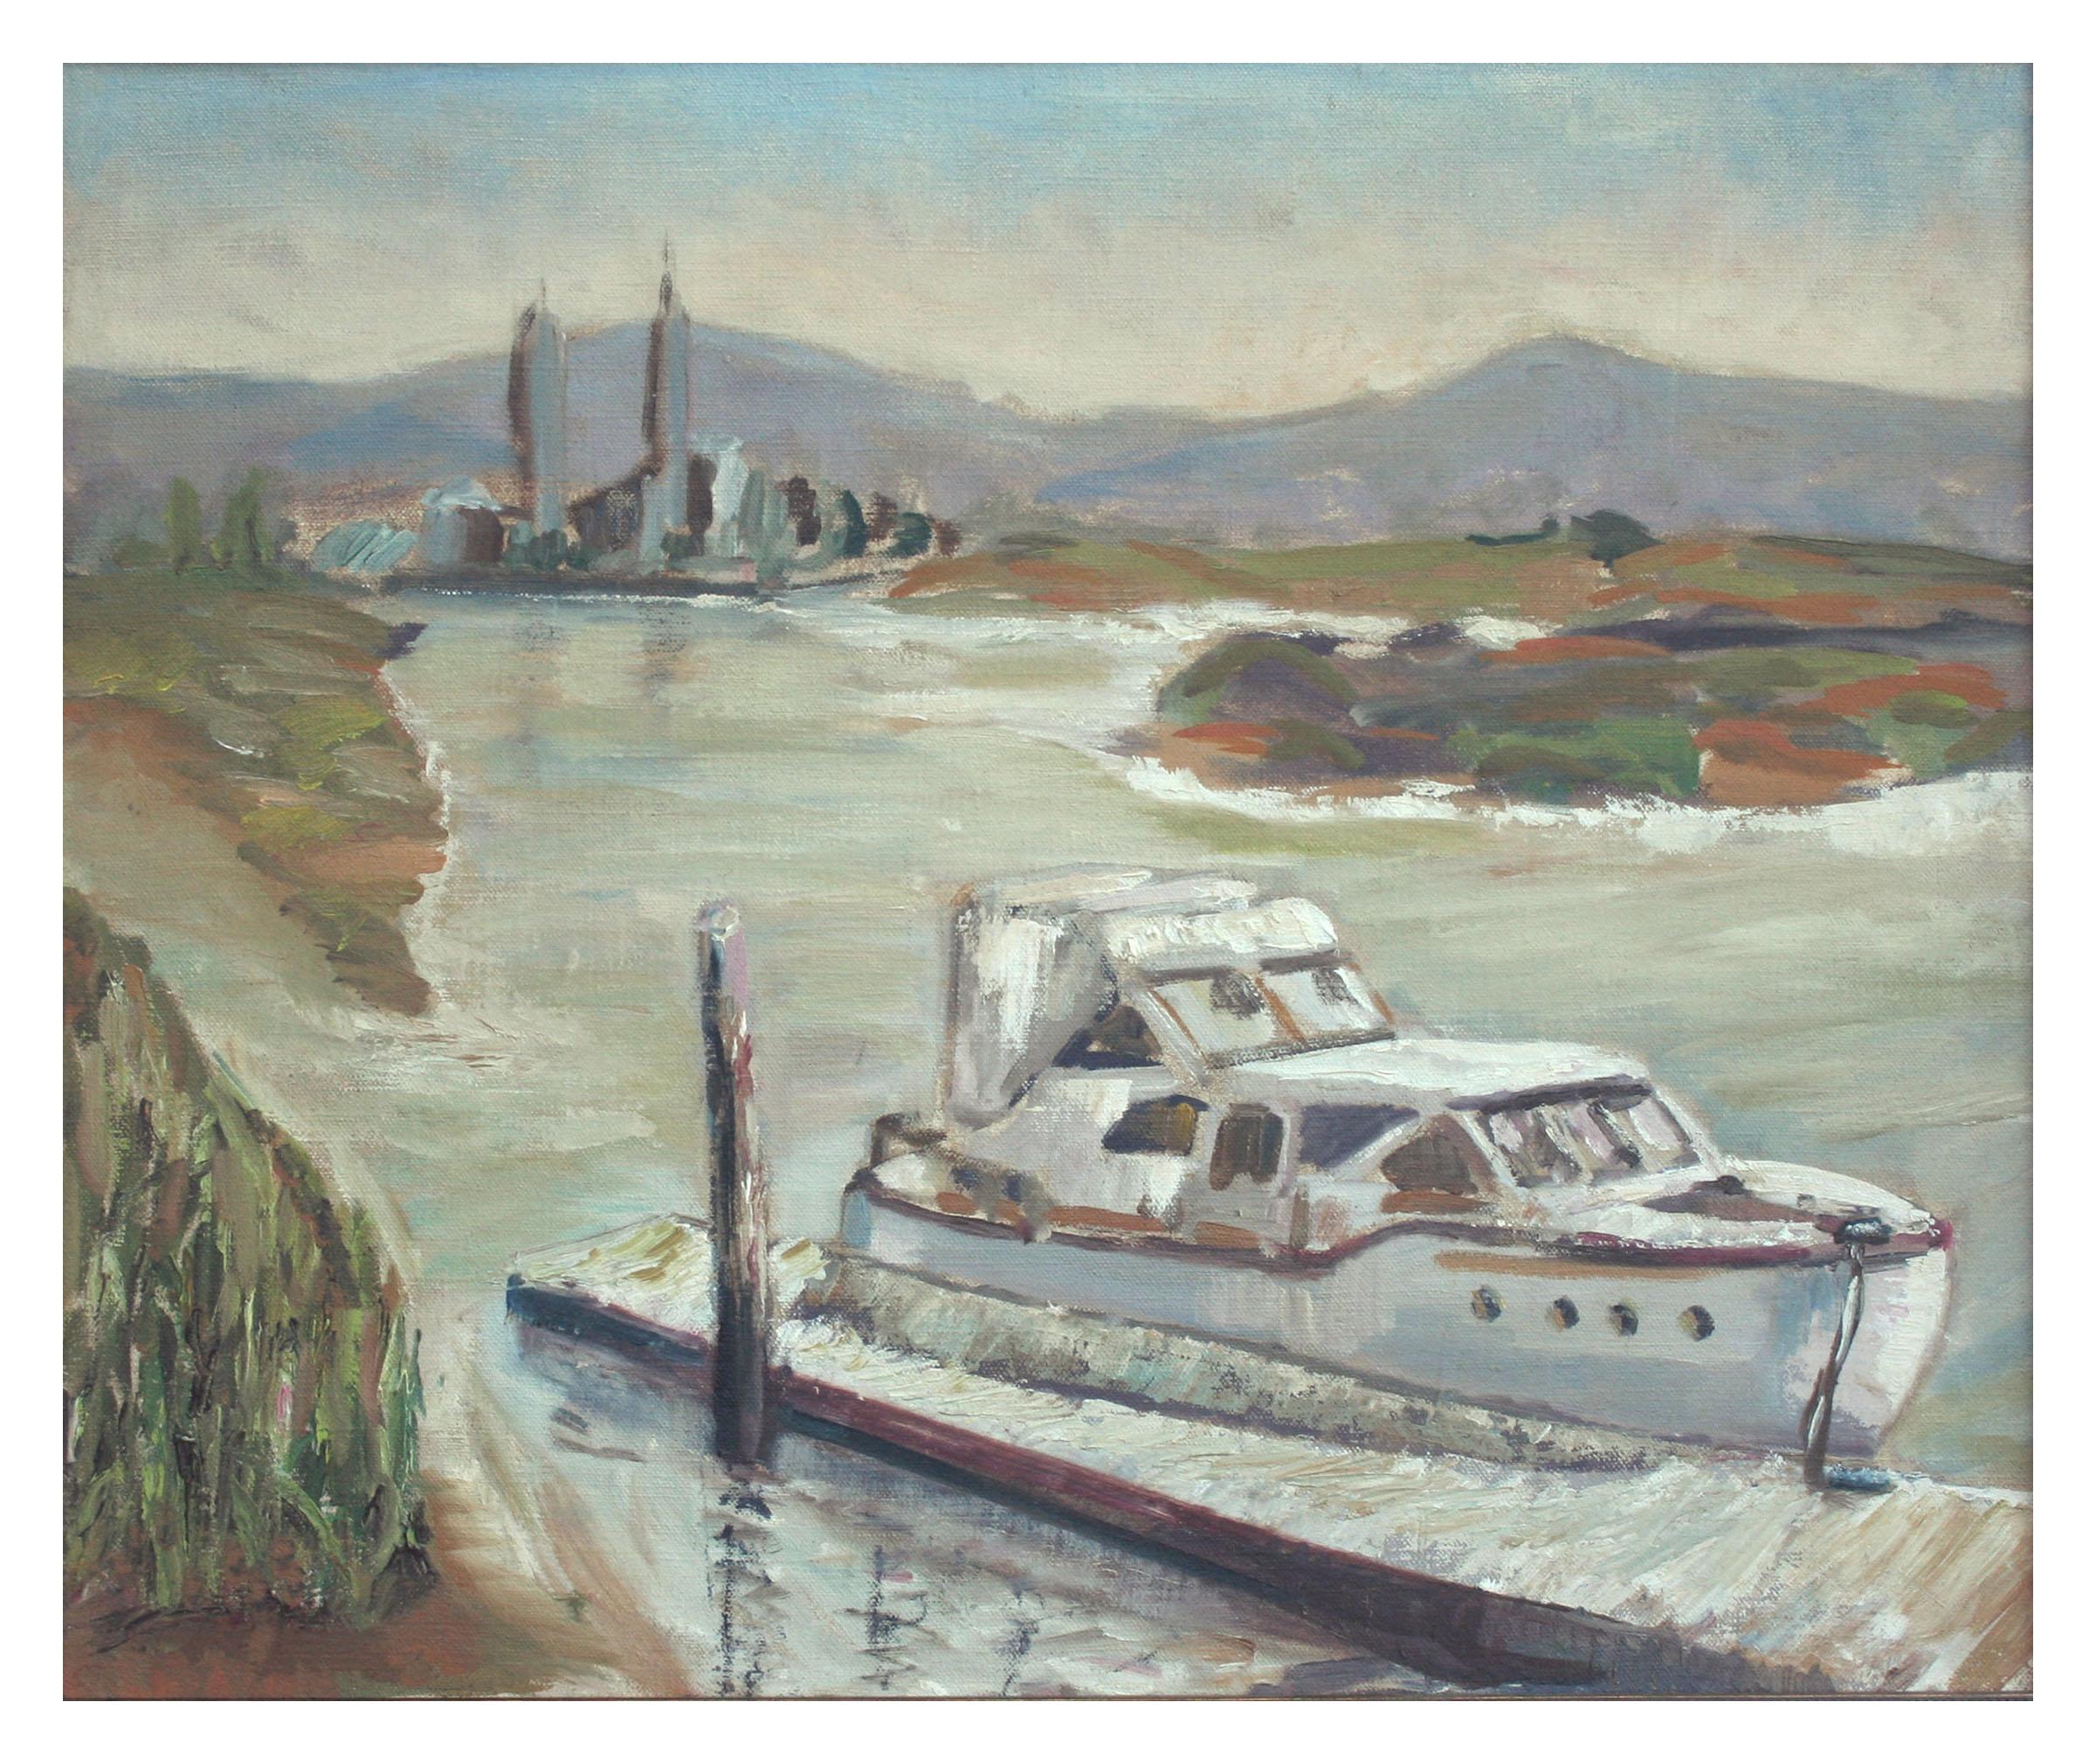 Boat at Moss Landing, Monterey Bay California Seascape - Painting by Unknown